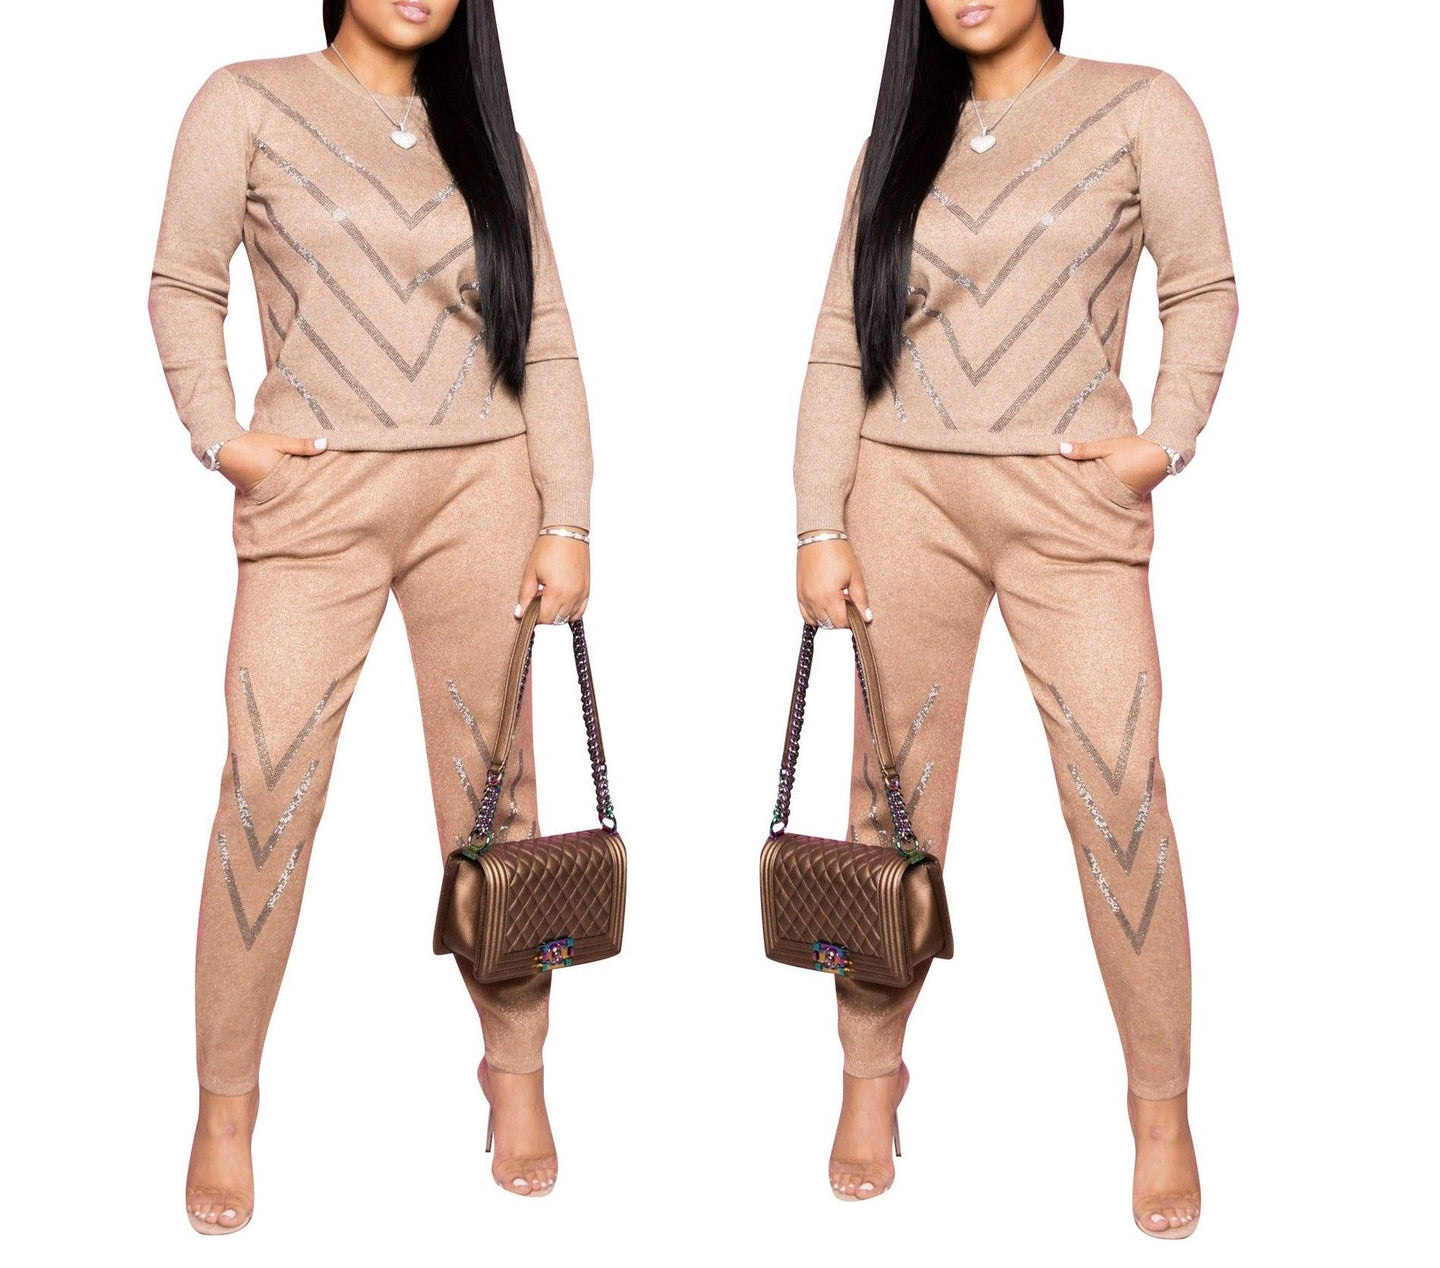 Women's clothing suits - Curtis & Ivory